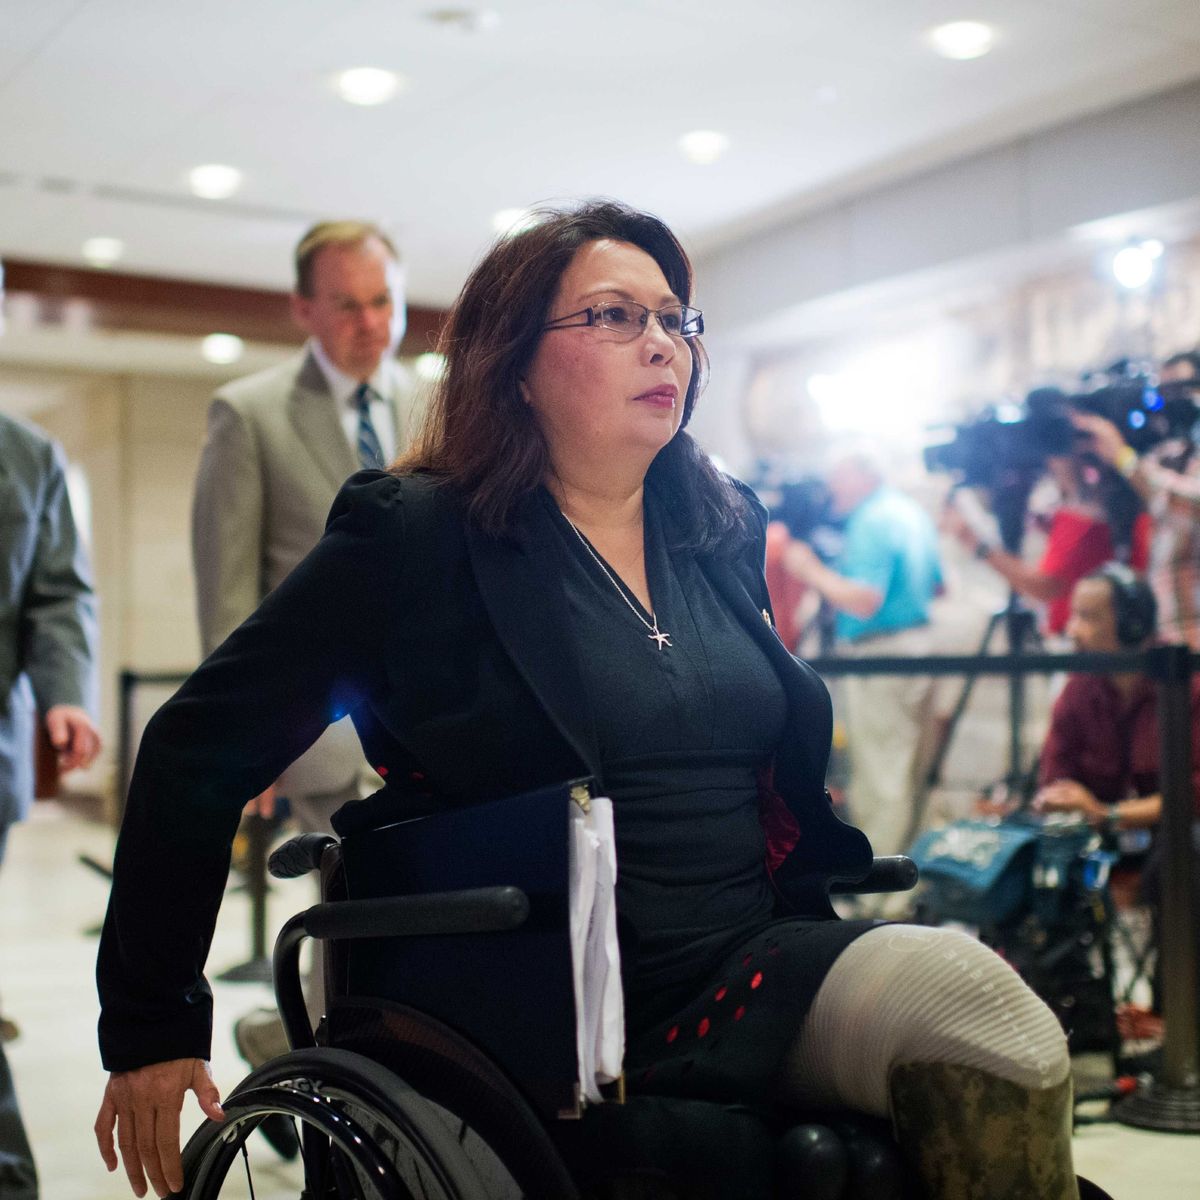 Tammy Duckworth Wins U.S. Senate Seat - 6 Things to Know About Tammy ...